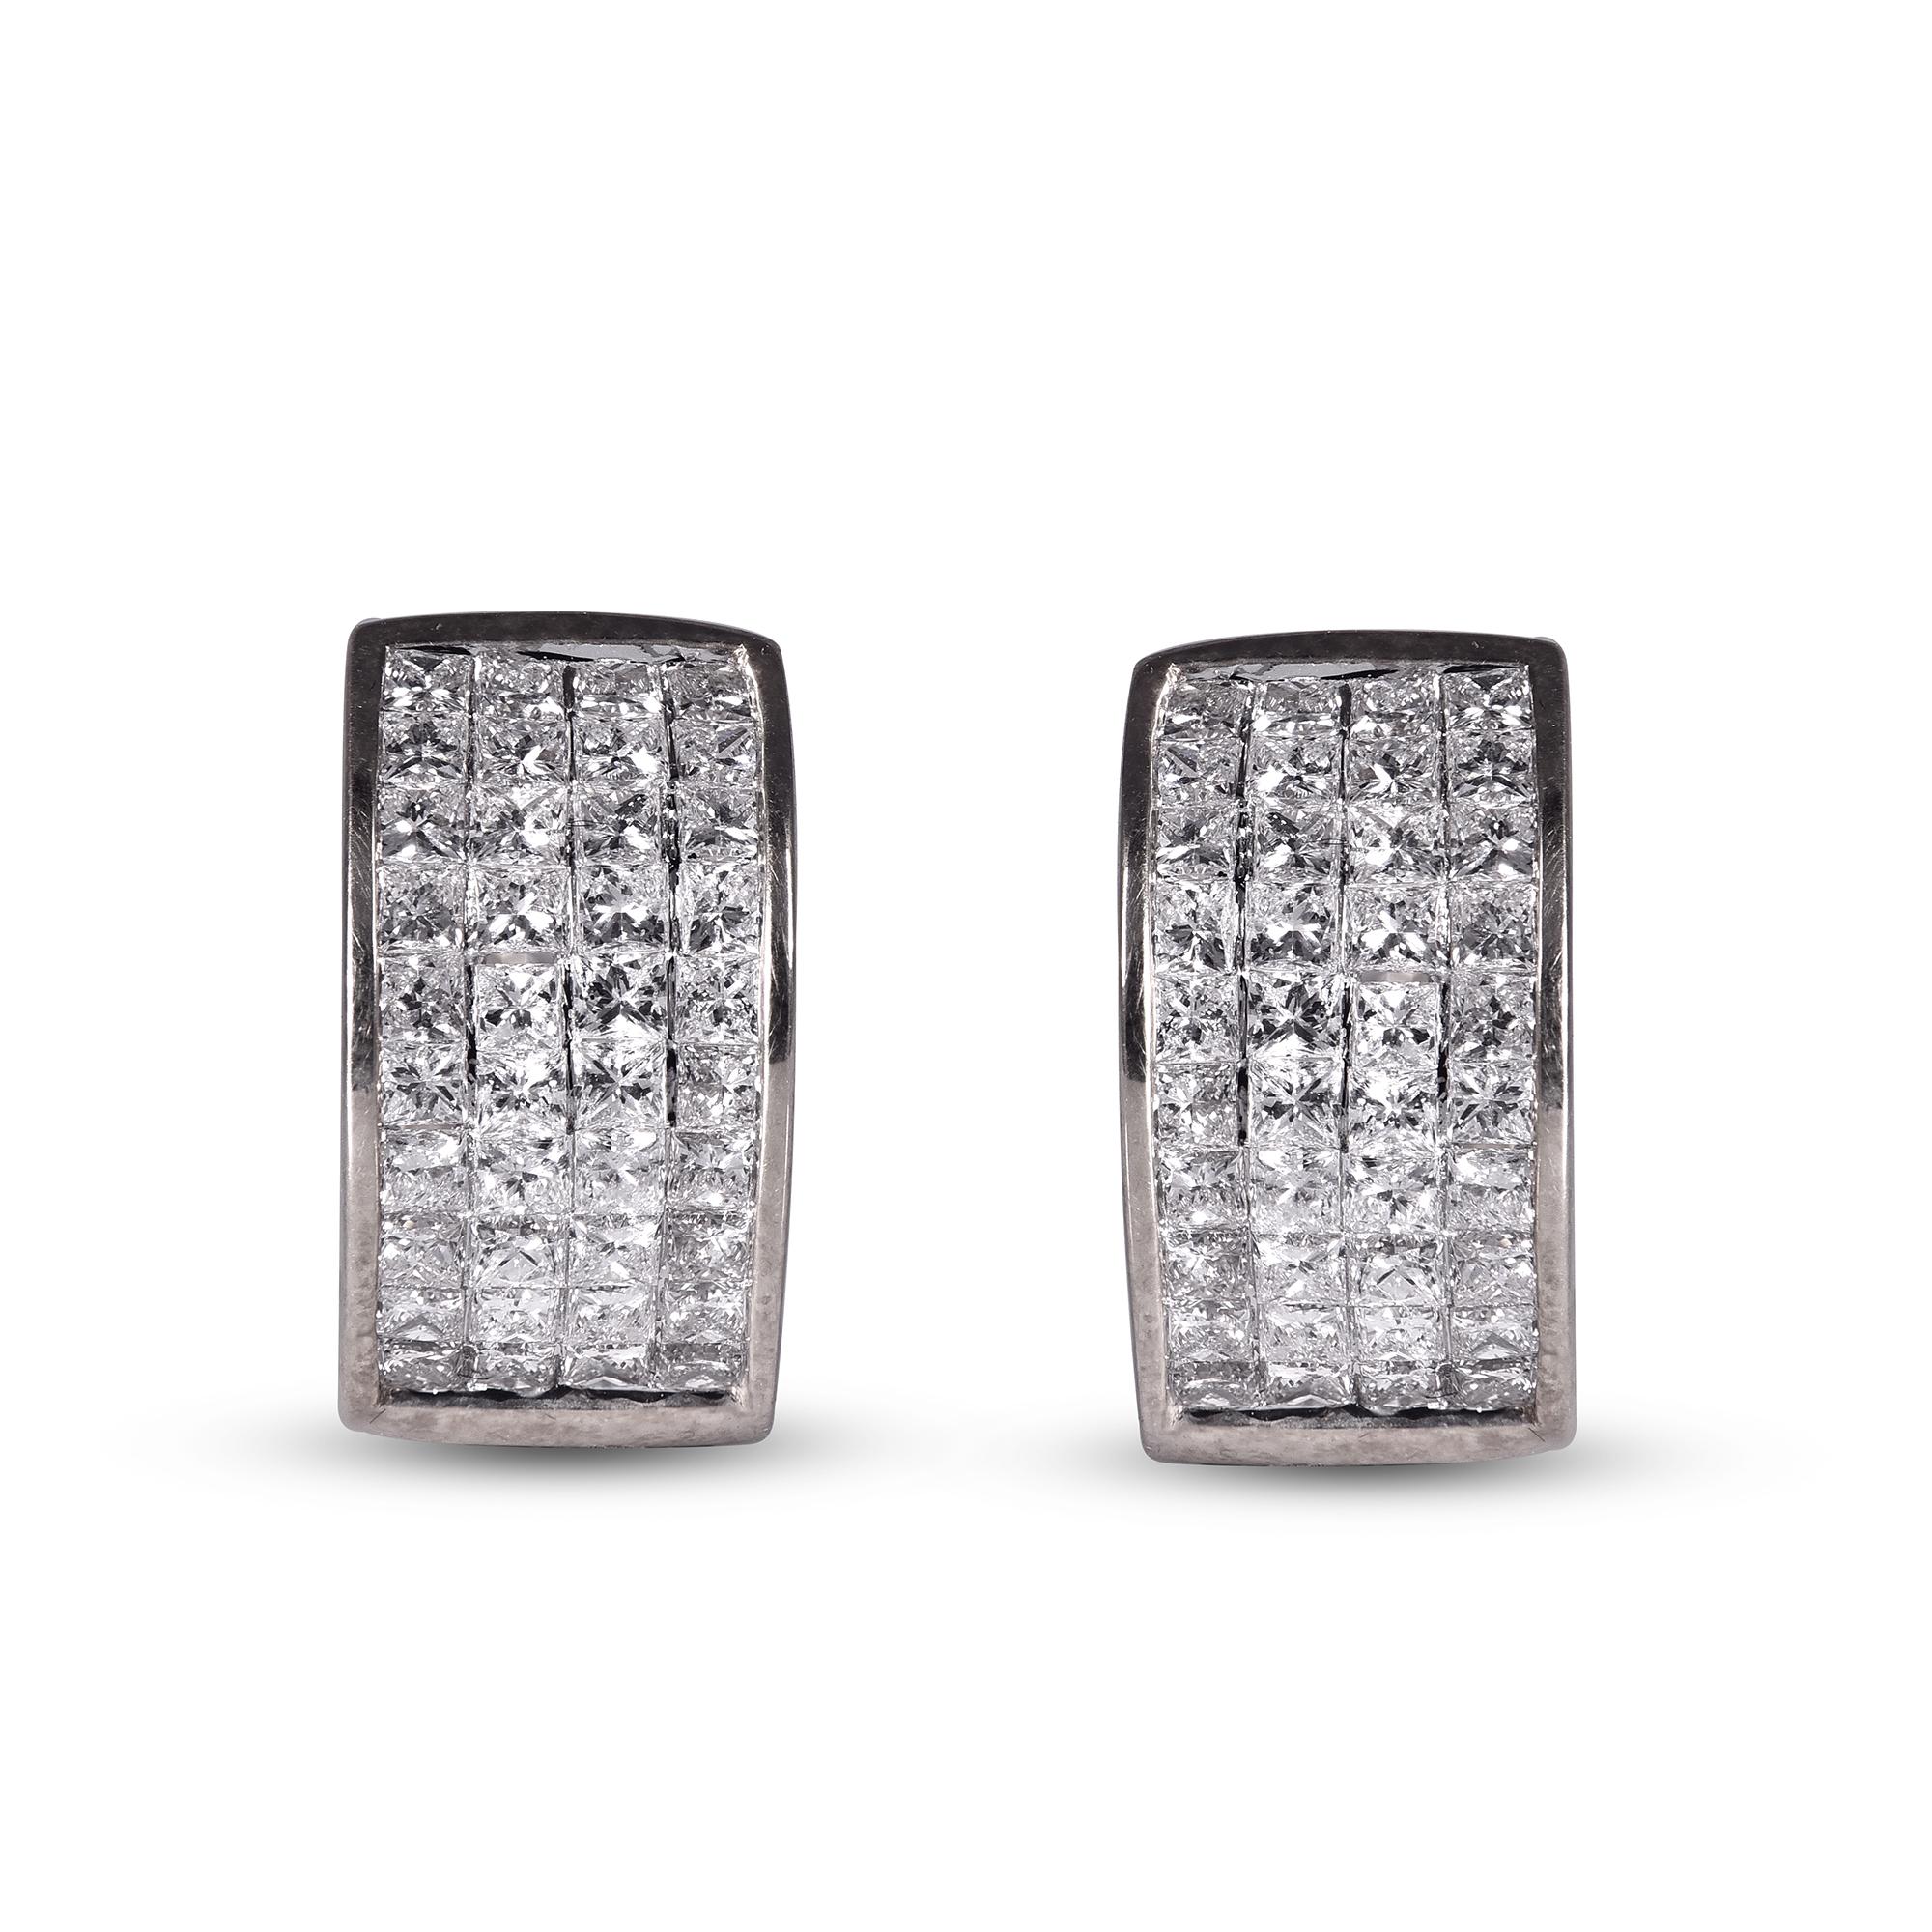 The perfect complement to her classic style, this diamond huggie earrings shines with your happily ever after. These earrings feature clusters of dazzling with 80 princess-cut diamond set in invisible setting. These timeless huggie earrings top post